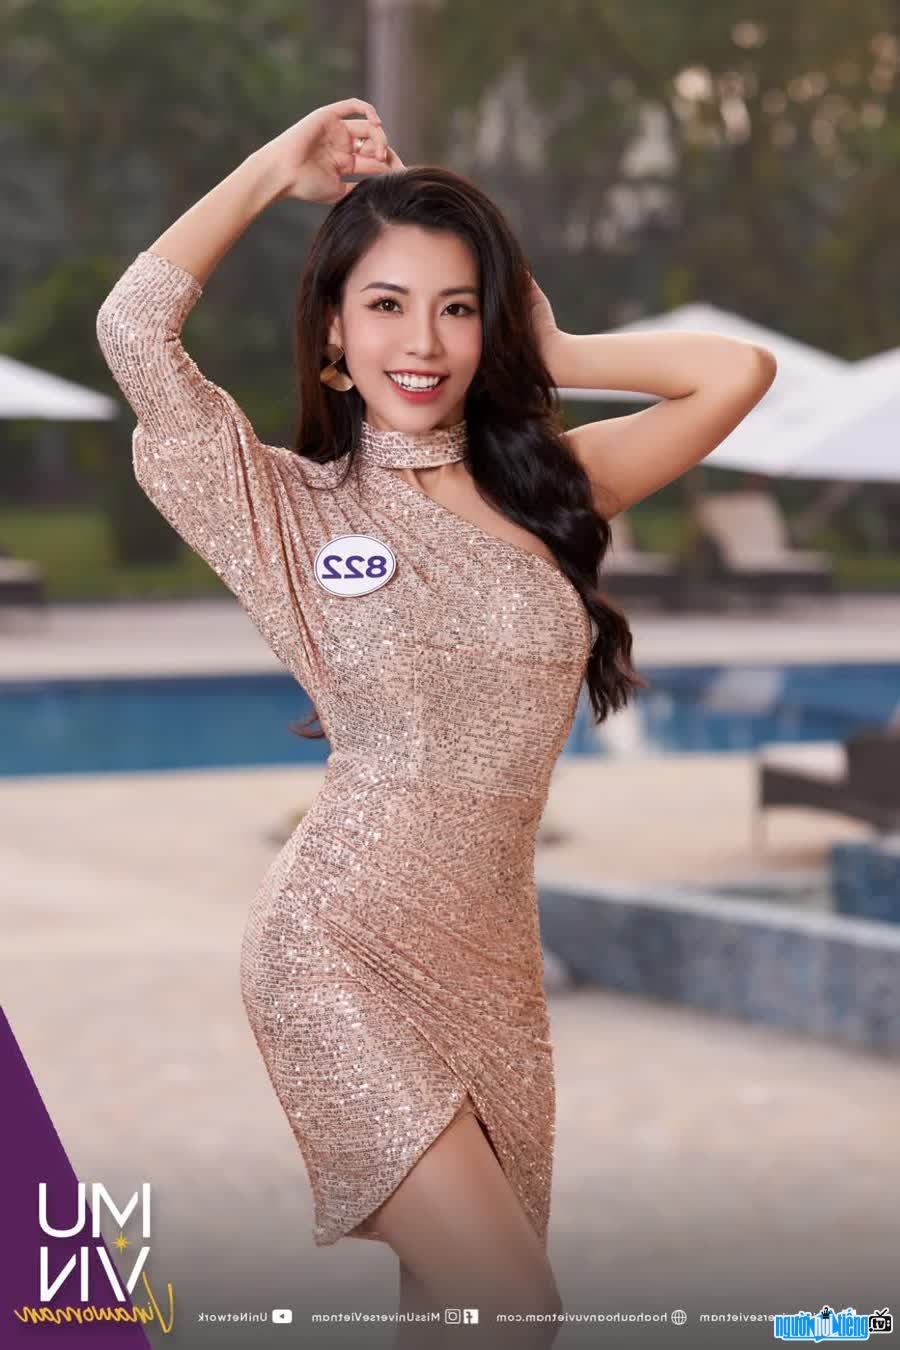 Minh Quyen's pictures in the Miss Universe 2022 contest